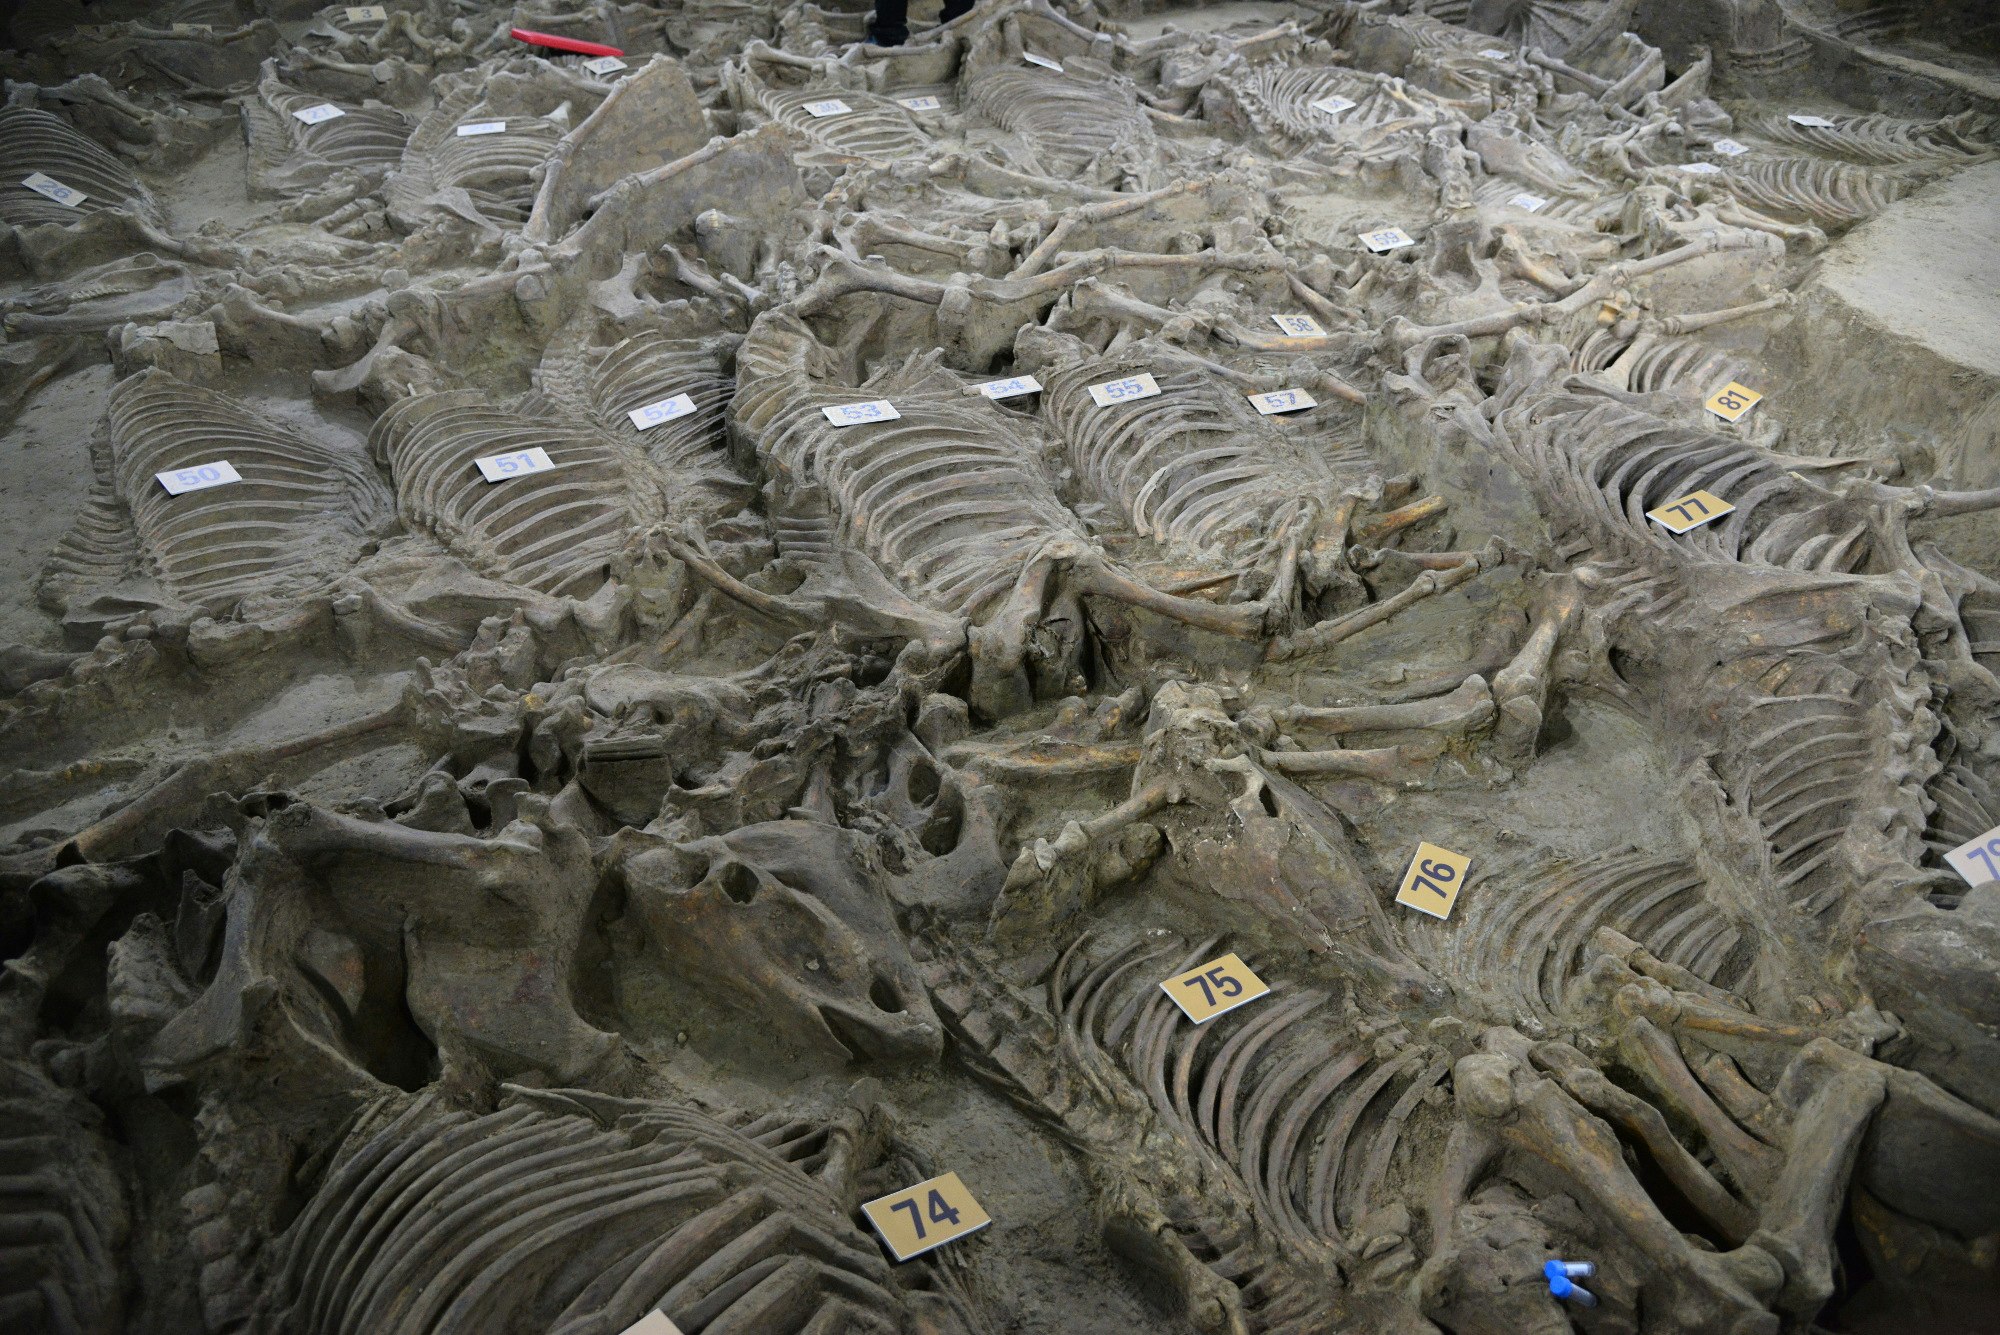 Skeletons of horses found by archaeologists